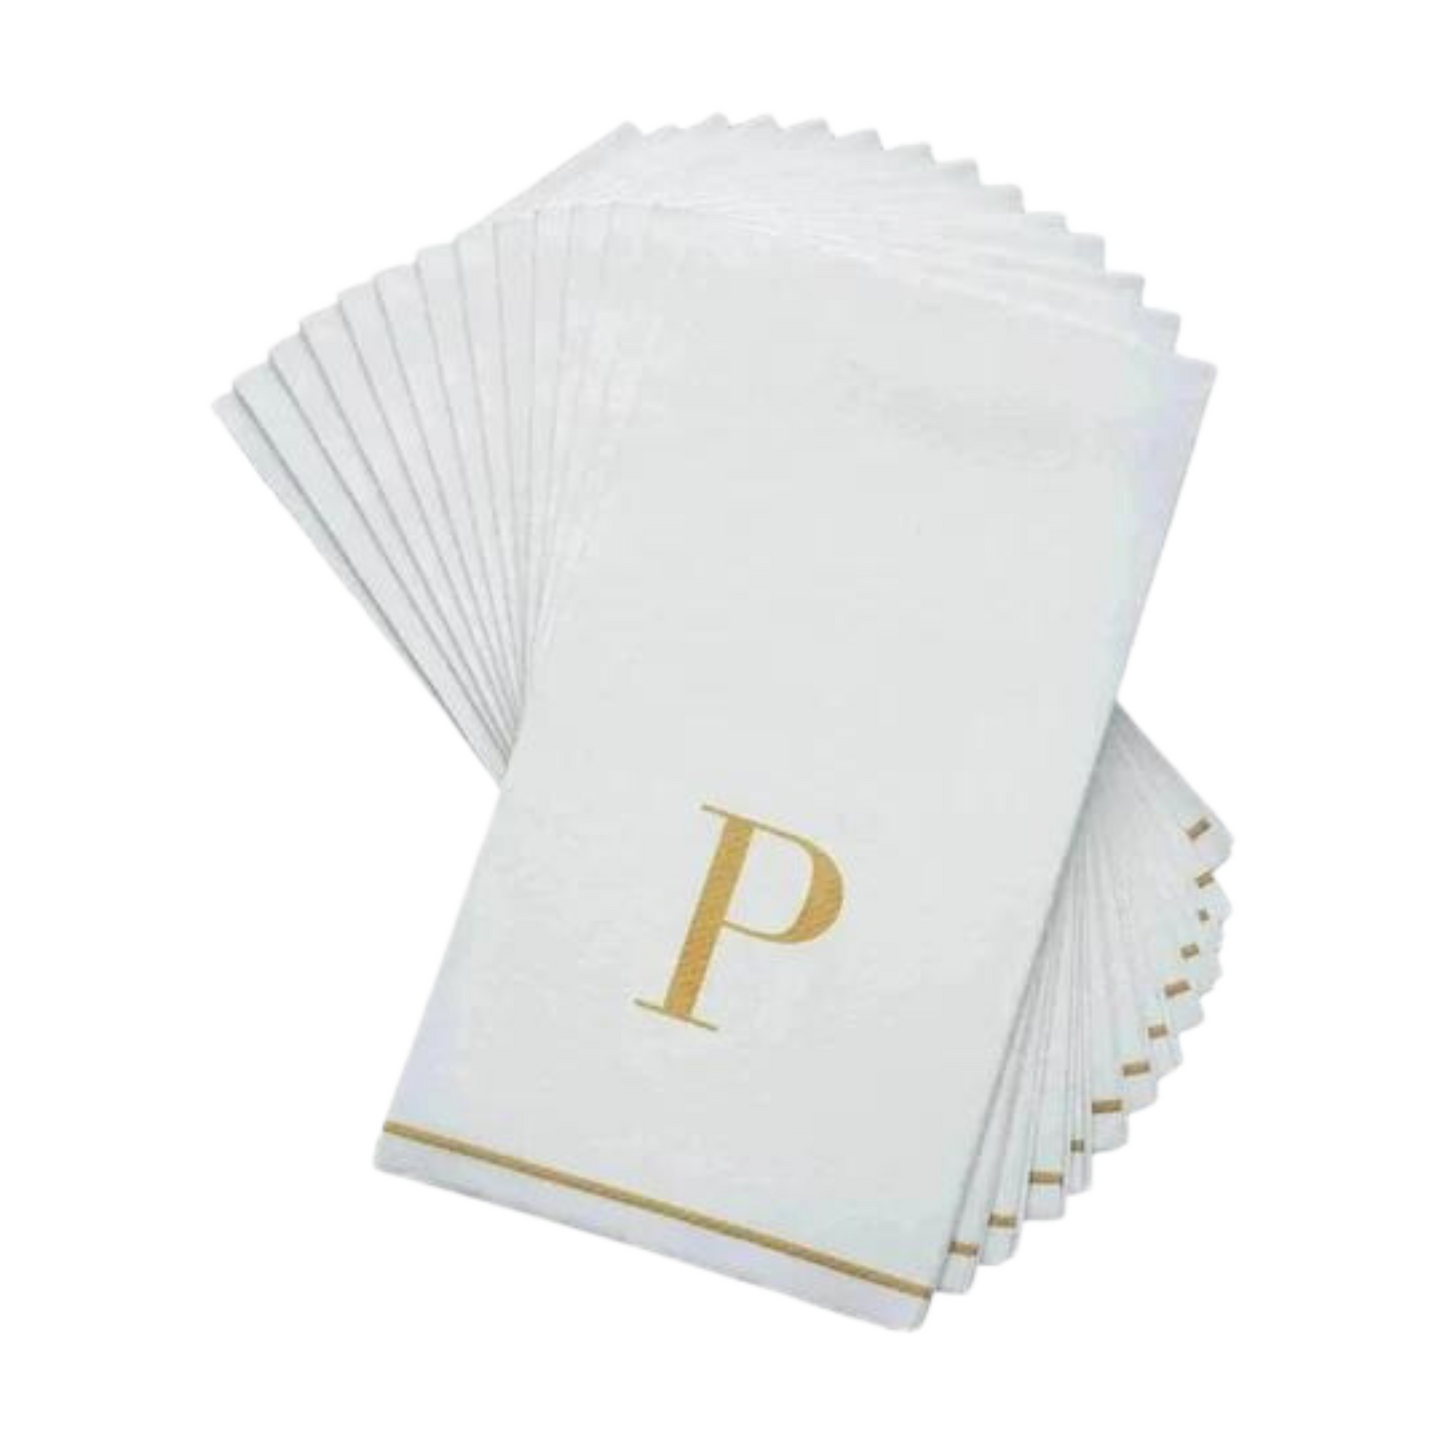 Letter P Gold Monogram Paper Disposable Dinner Napkins | 14 Napkins Napkins Luxe Party NYC 12 Packs (168 Napkins) ⟹ 10% OFF  